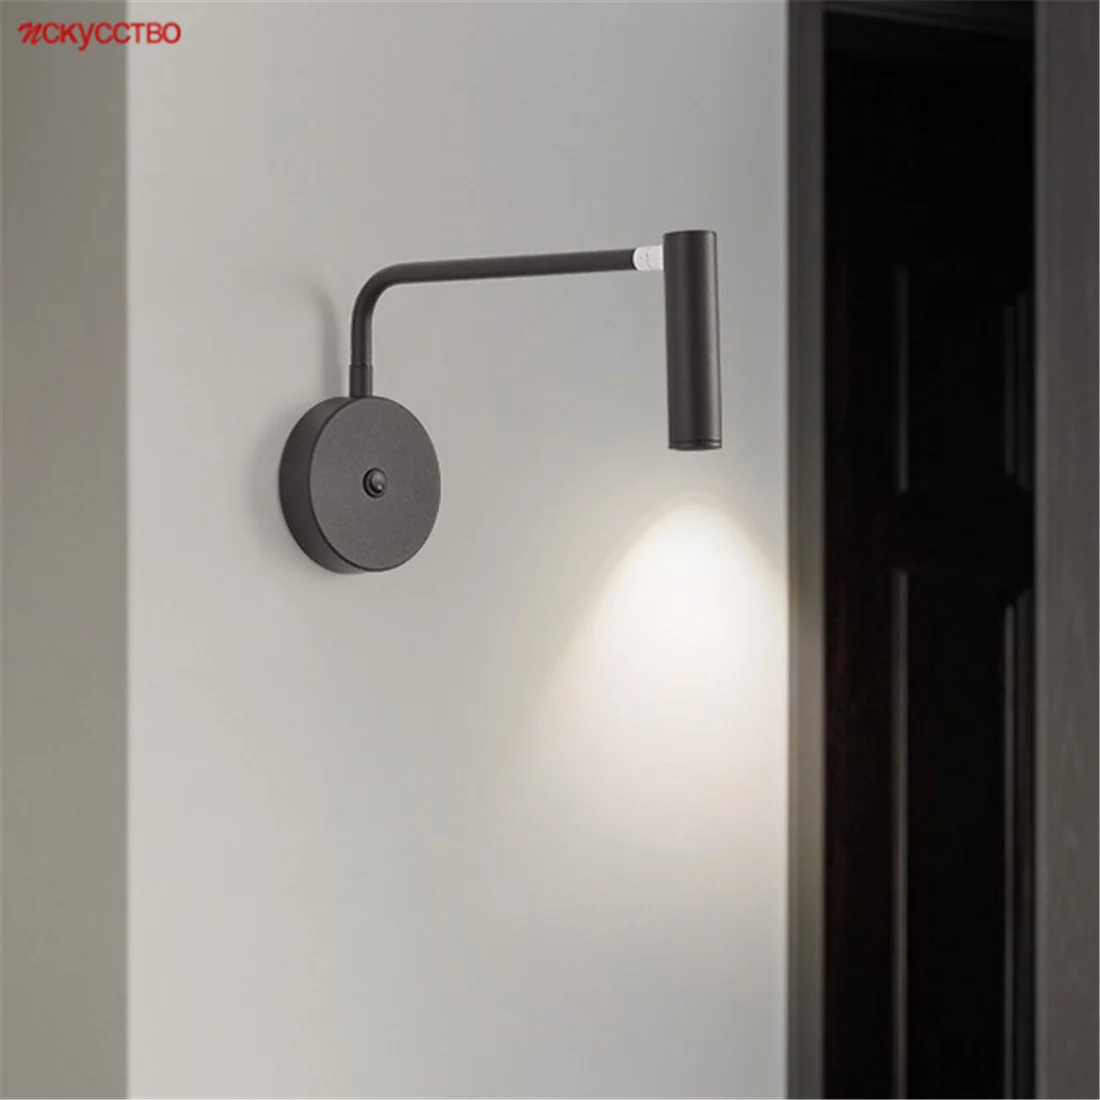 

Modern Minimalism Reading Wall Lamp With Switch Hotel Study Desk House Decor Bedside Swing Arm Fitting Bracket Light Fixtures